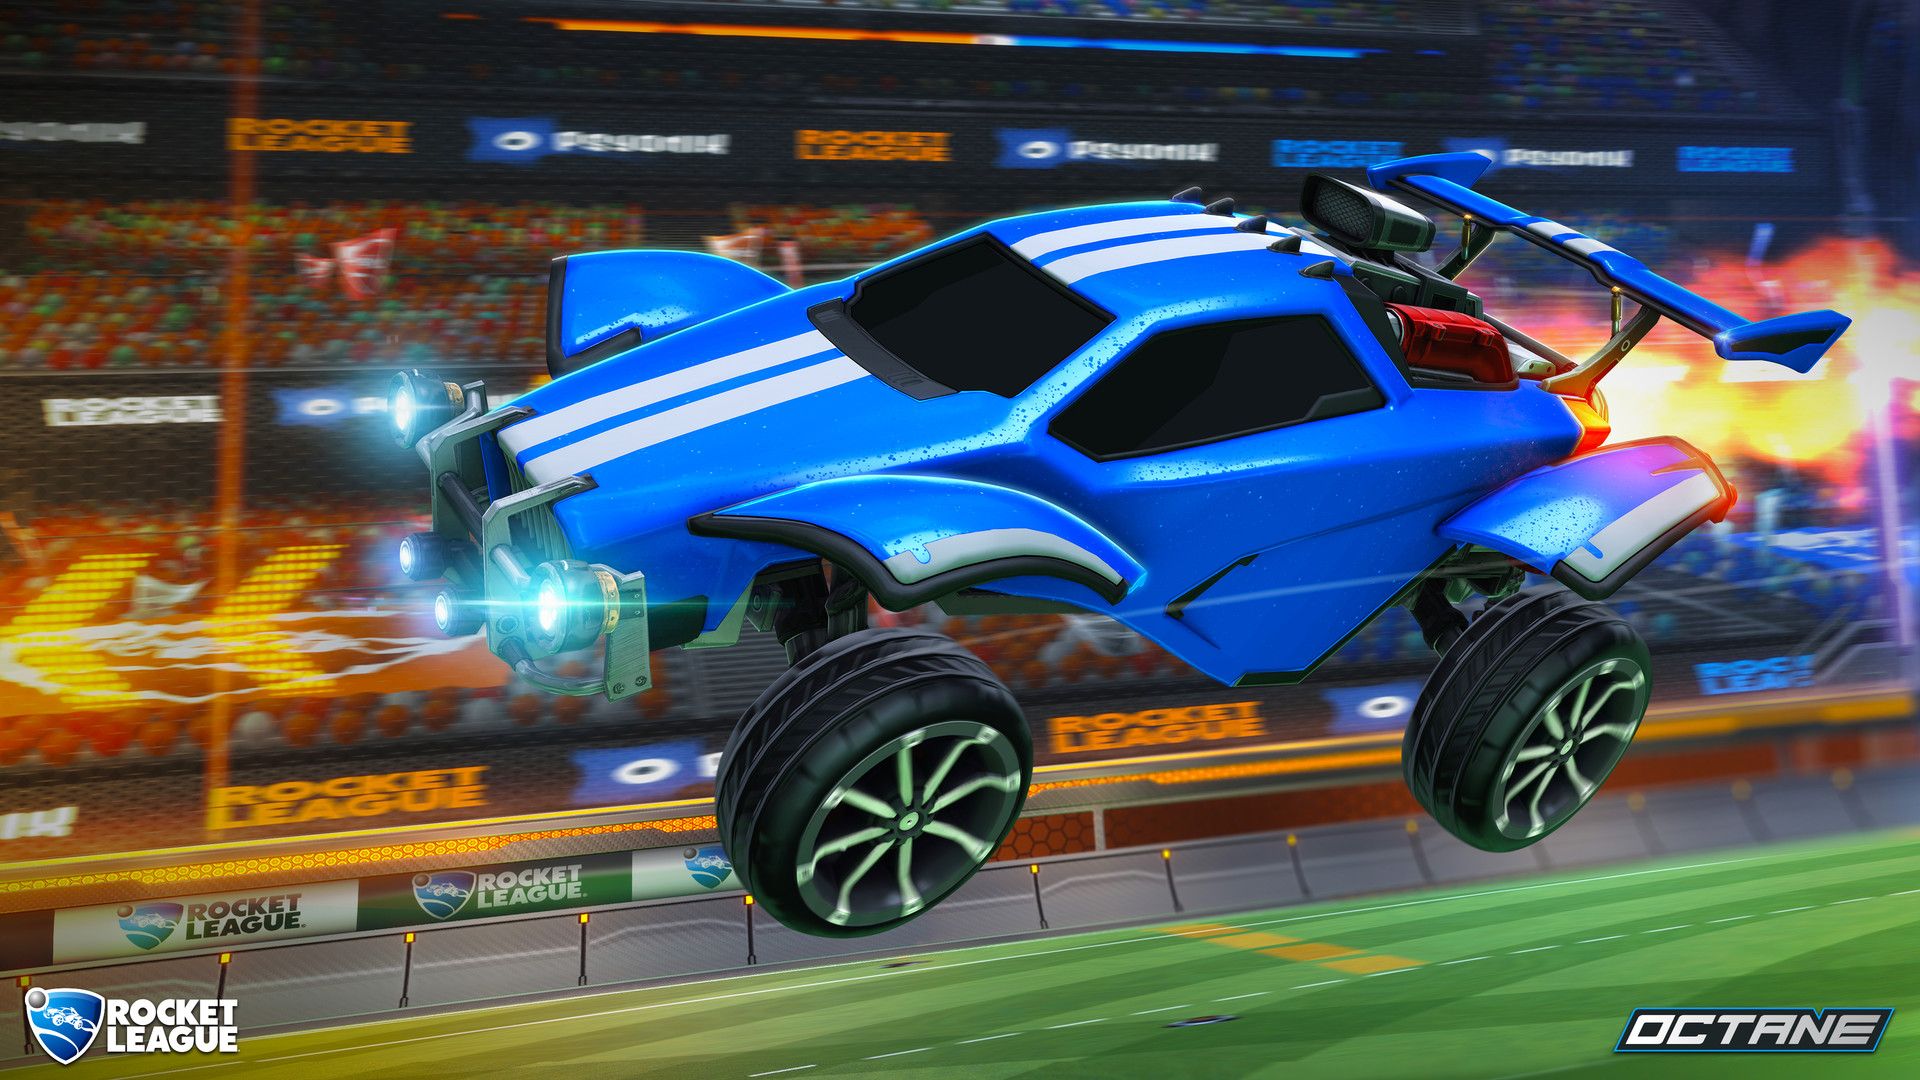 Rocket League: Best Cars To Use (& Why)